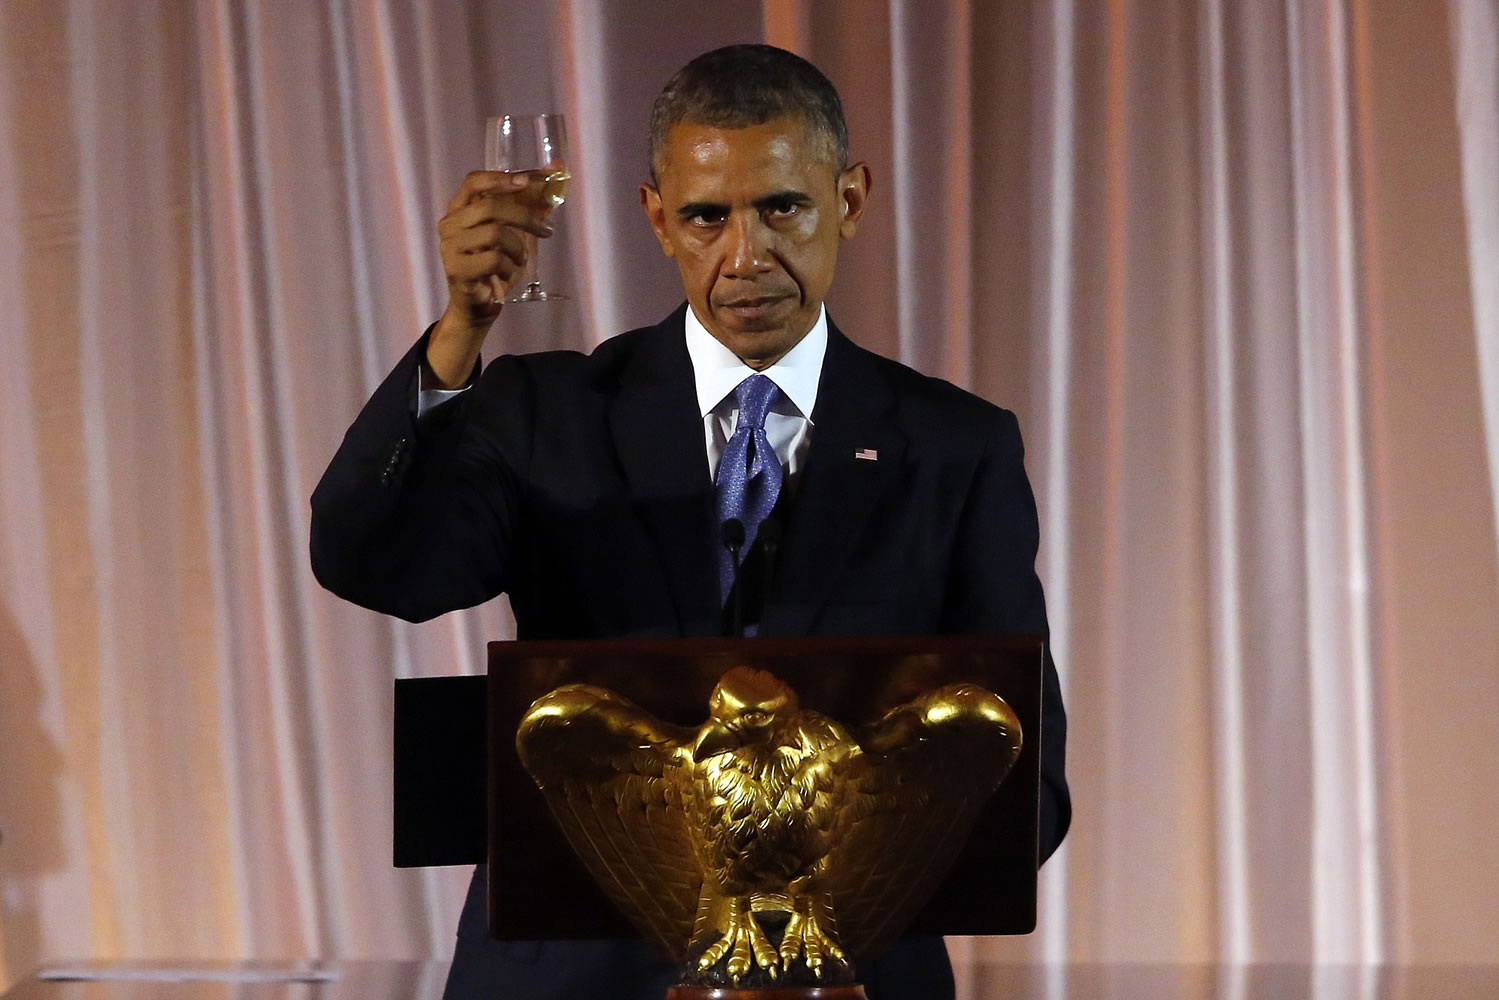 President Barack Obama offers a toast at a dinner for the U.S.